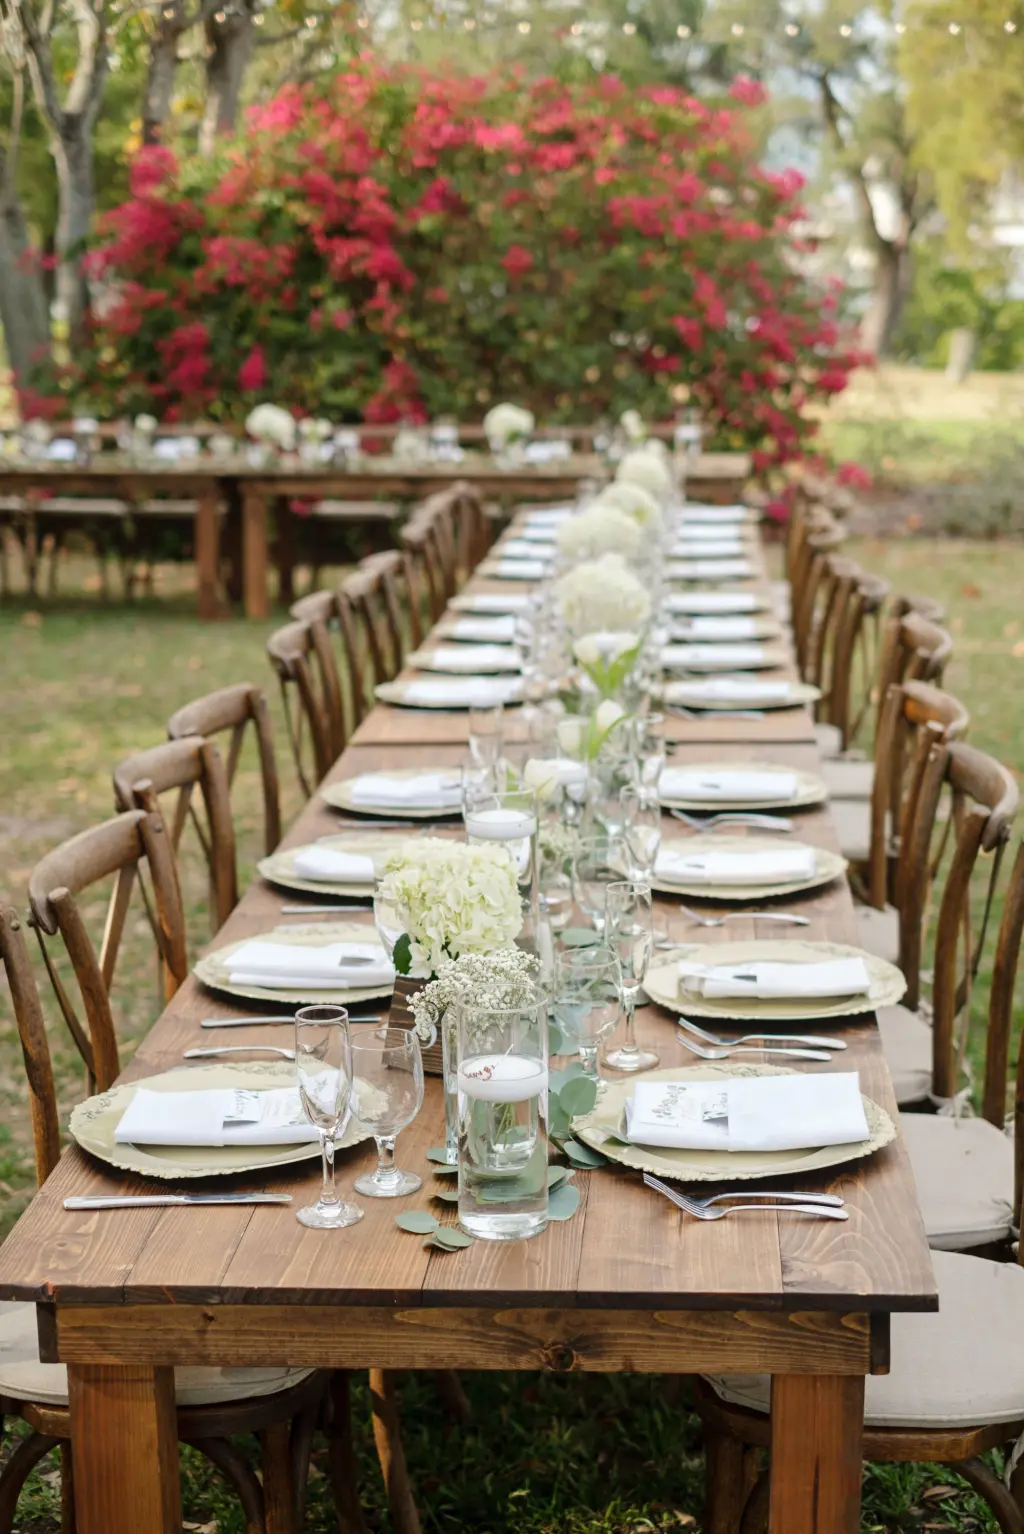 Long Feasting Tables with Wooden Crossback Chairs | Floating Candles, White Hydrangeas and Tulip Wedding Reception Centerpiece Decor | Tampa Bay Caterer Amici's Catered Cuisine